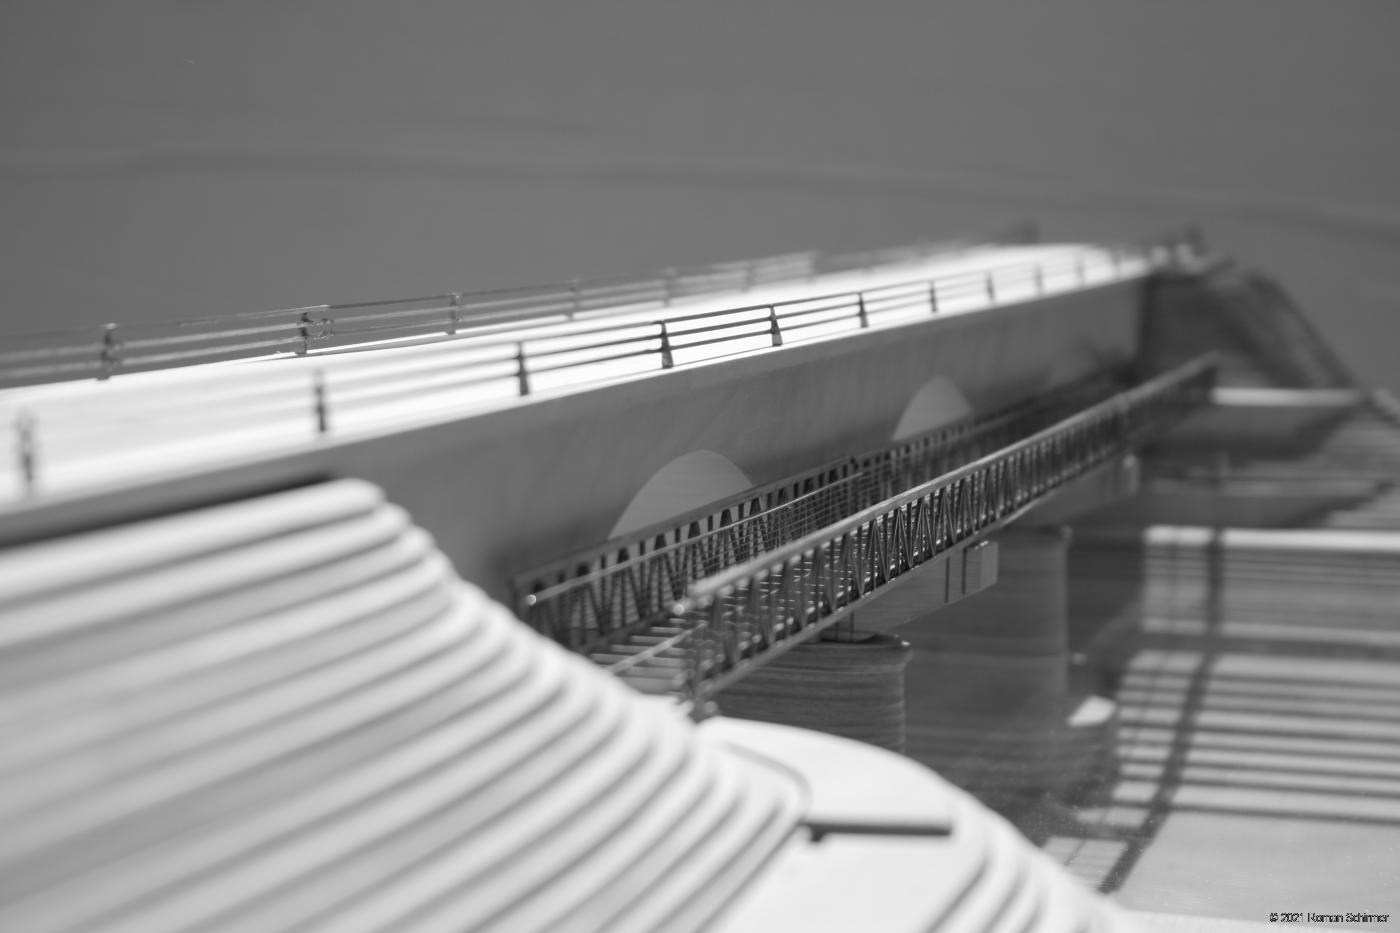 Model of the Bridge of Chateau Gontier